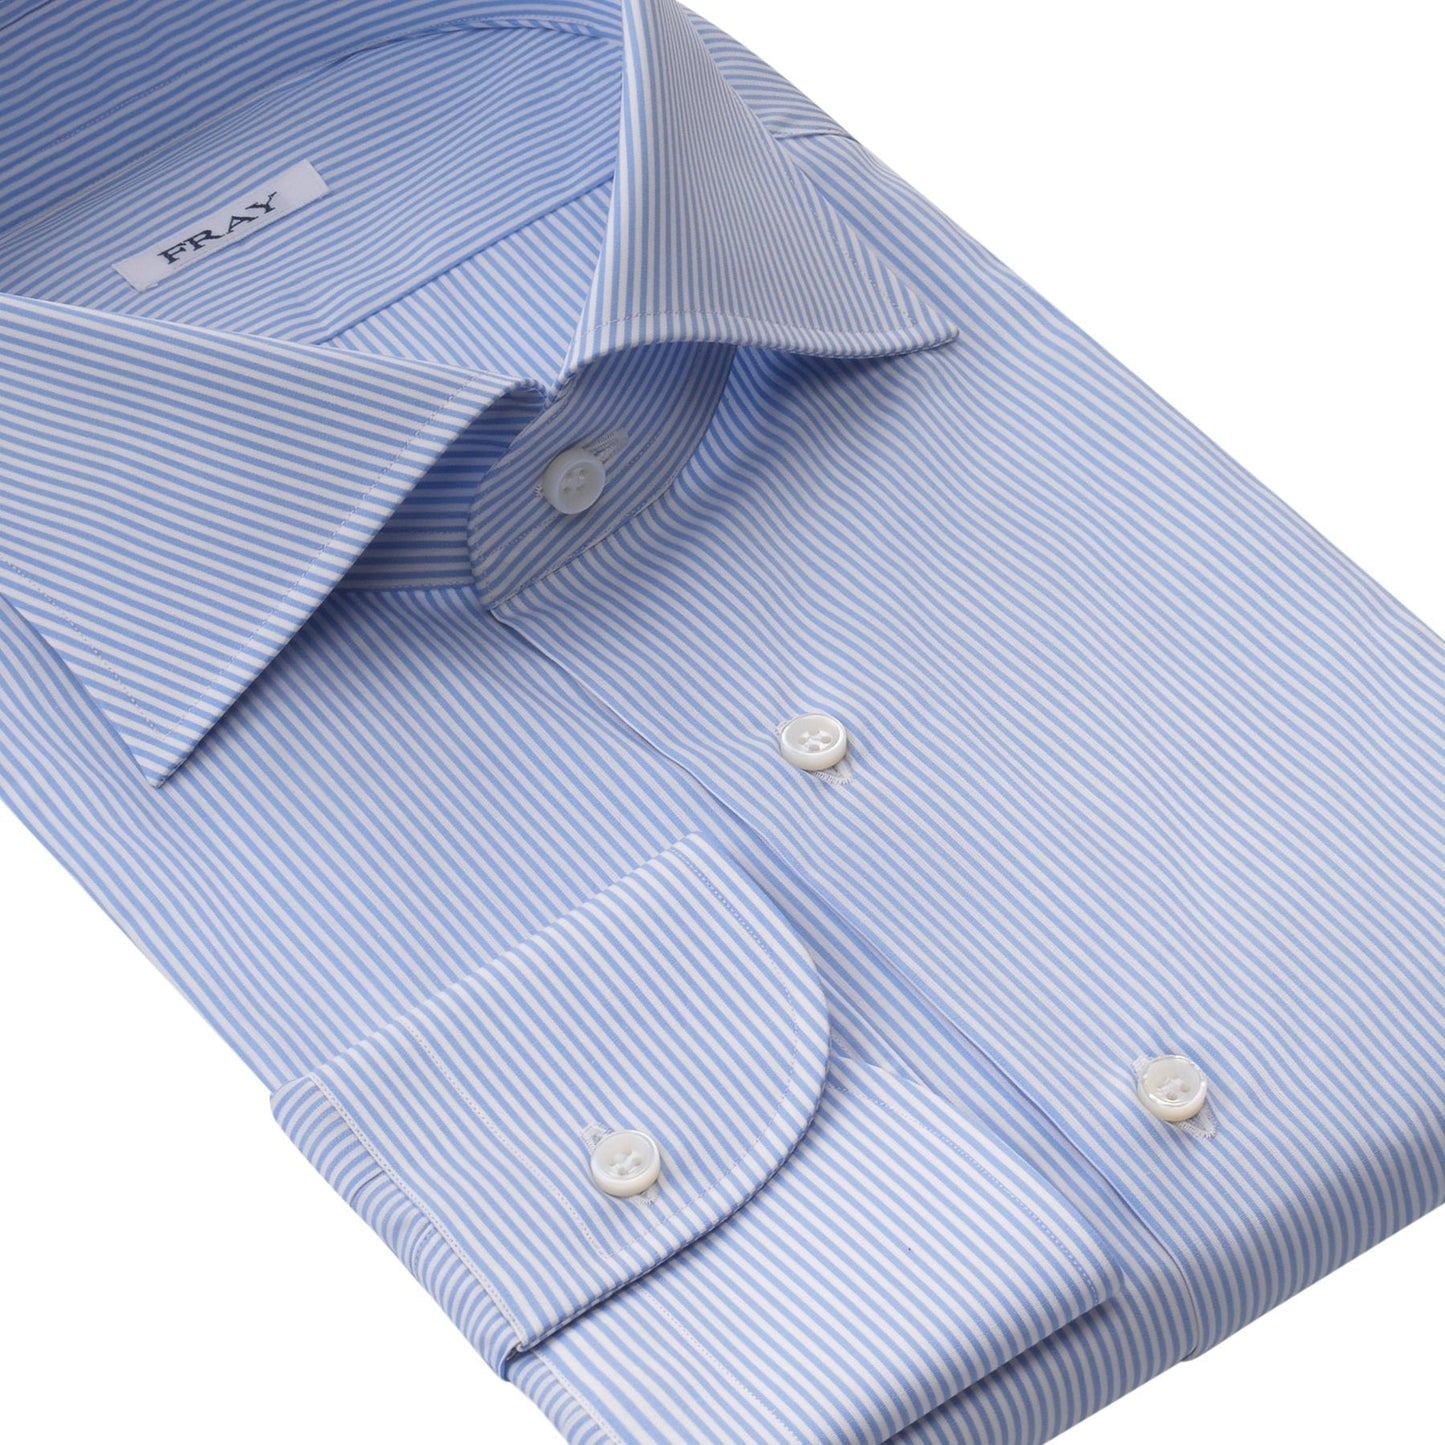 Fray Cotton Striped Shirt in White and Light Blue - SARTALE